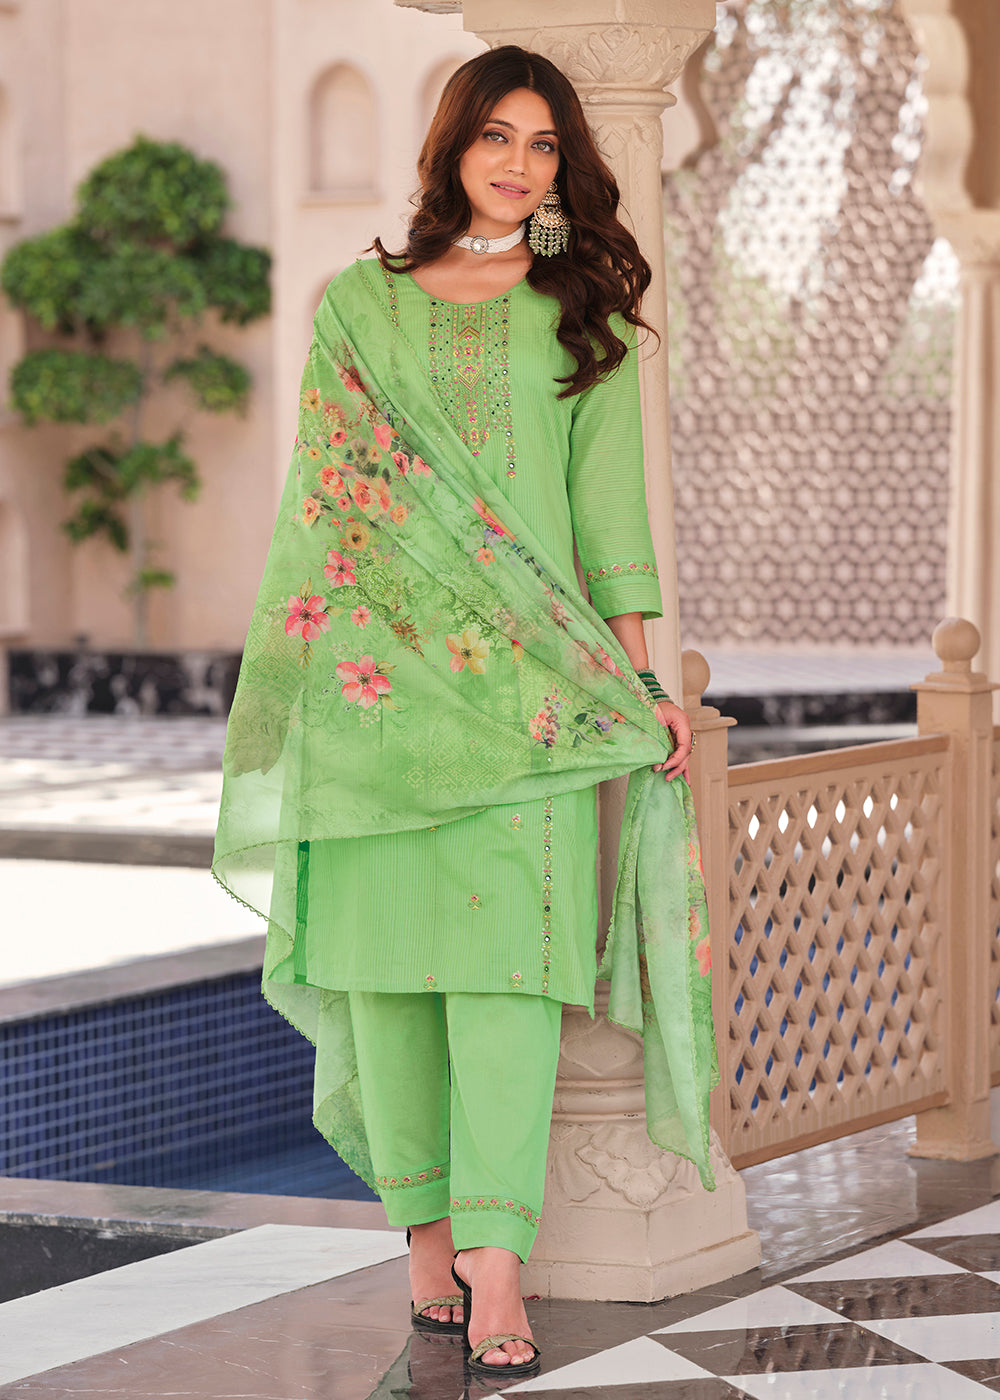 Buy Now Superior Green Cotton Khatli Hand Work Casual Salwar Suit Online in USA, UK, Canada, Germany, Australia & Worldwide at Empress Clothing.